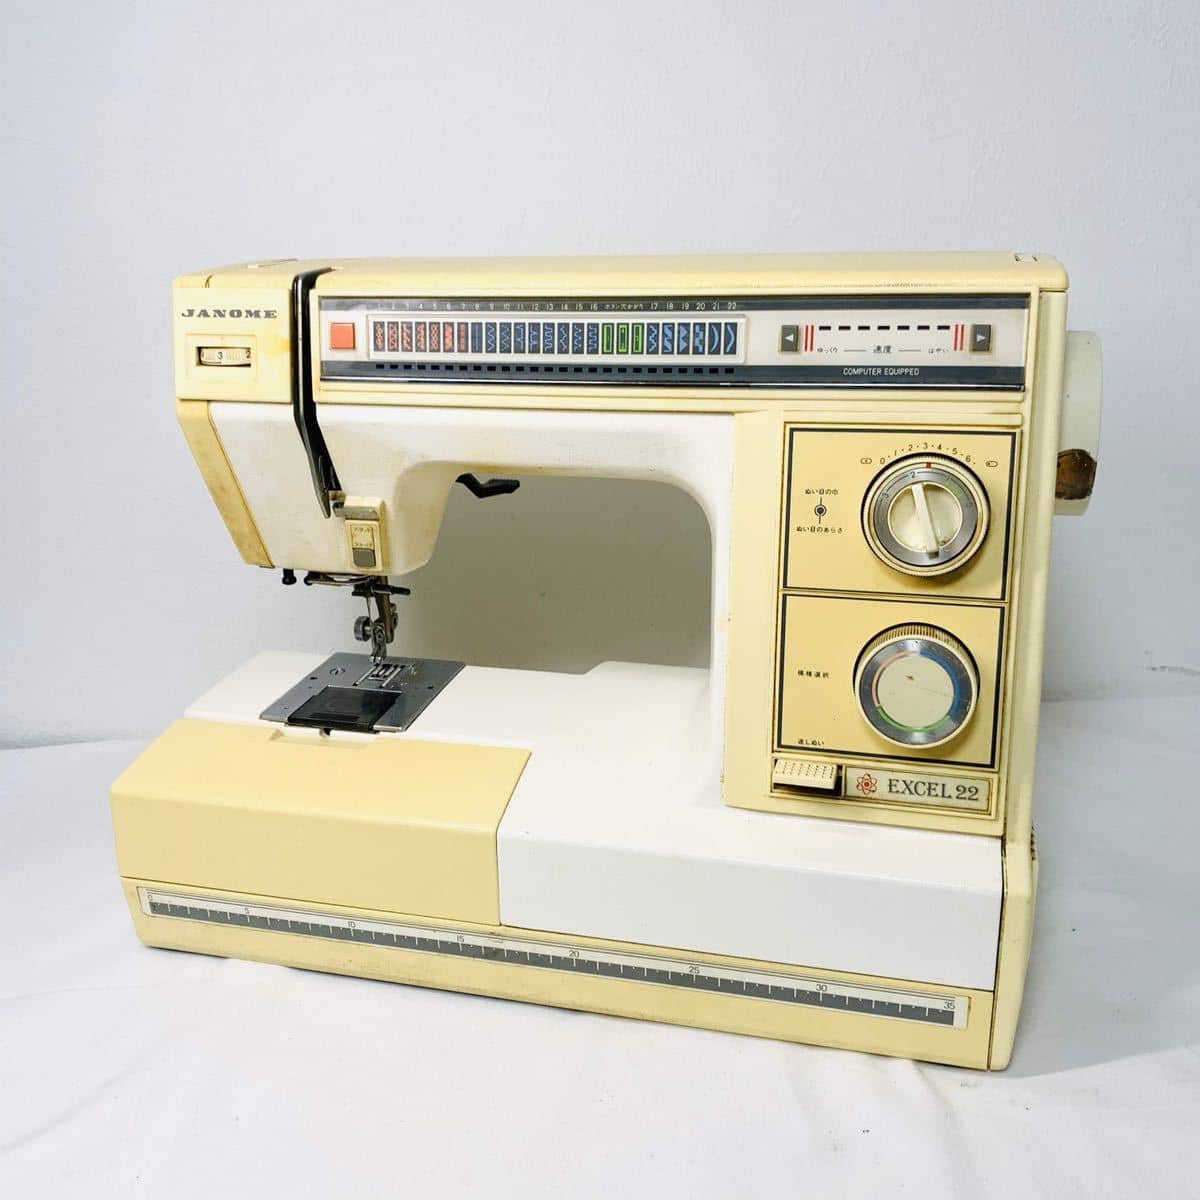 Used Janome Janome Janome Sewing Machine 818 Vintage Be Forward Store